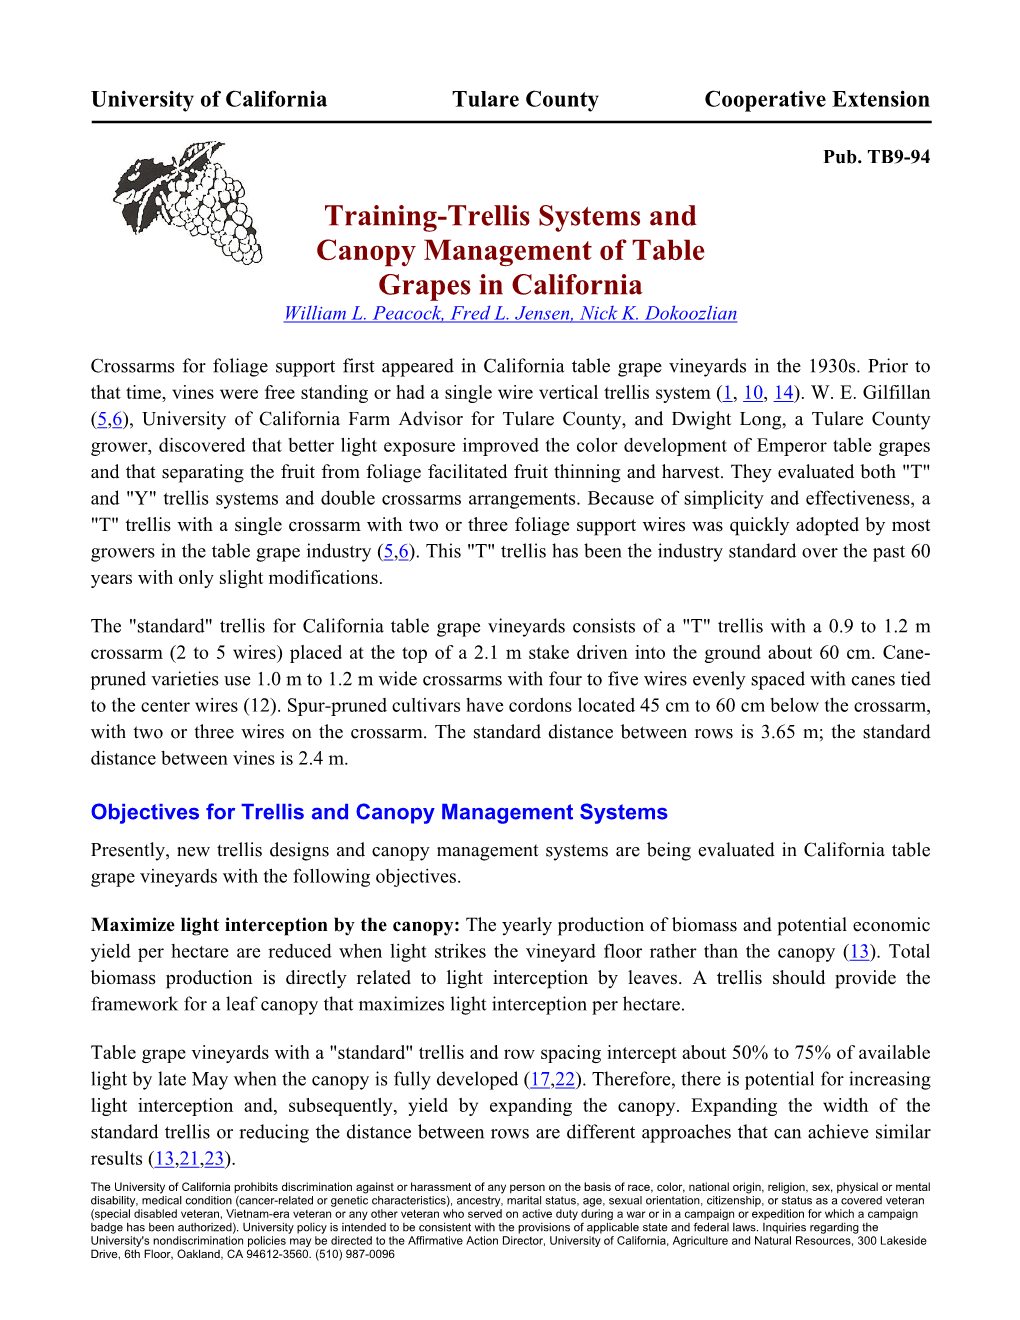 Training-Trellis Systems and Canopy Management of Table Grapes in California William L